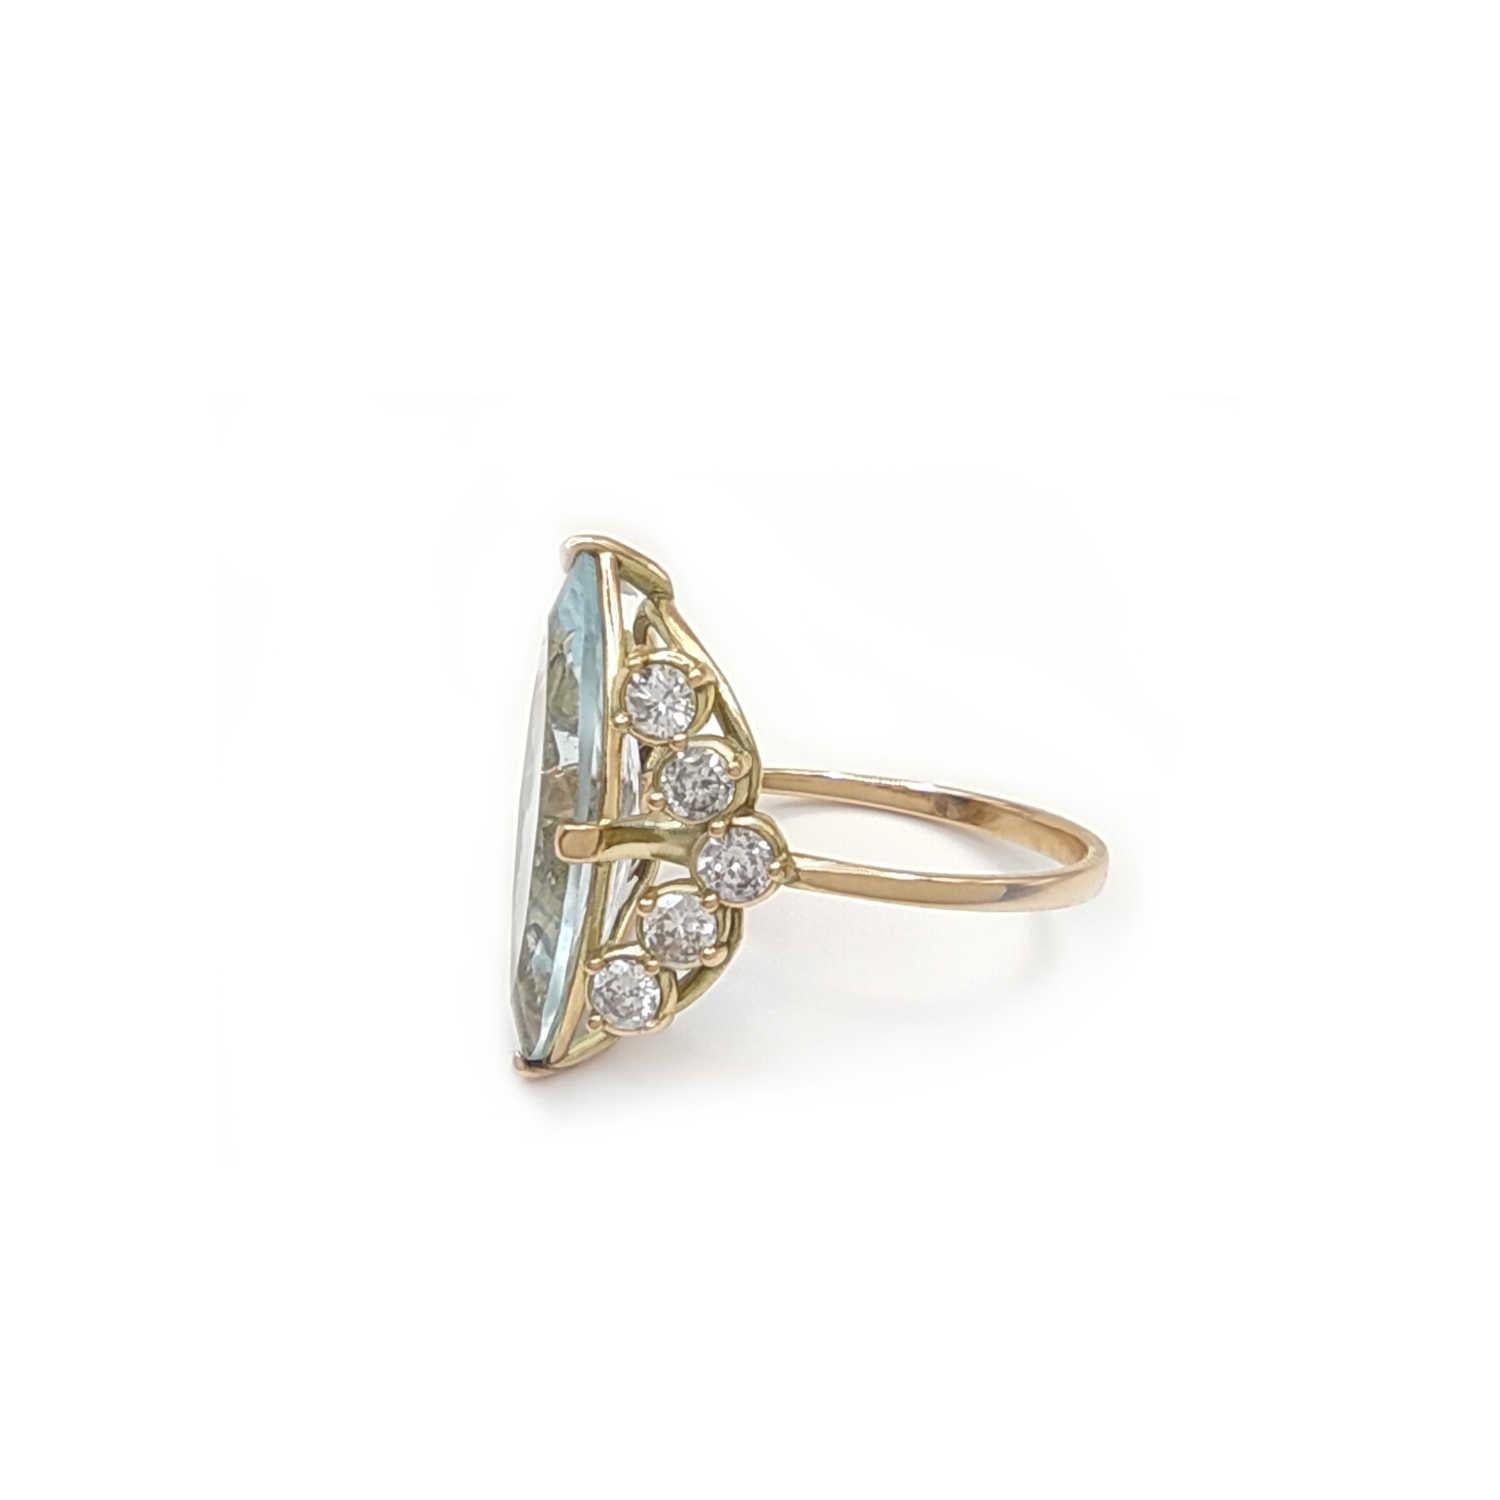 Certified Aquamarine Diamond Cocktail Ring in 14K Gold - Resizable, Perfect Gift For Sale 4